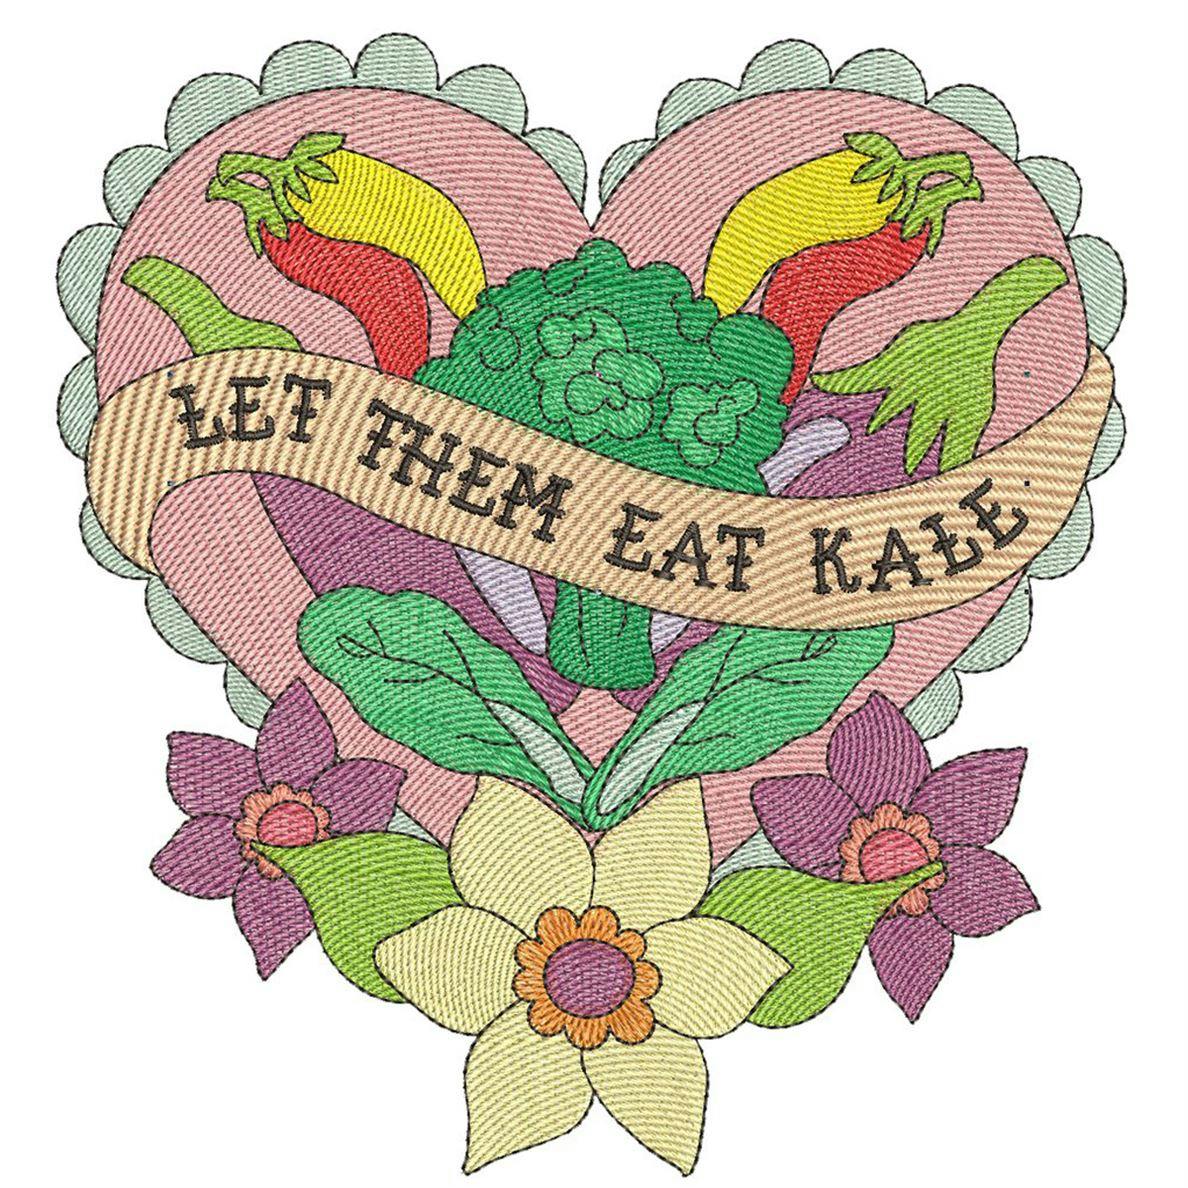 Kale design from Inked -- Eat your Veggies CD